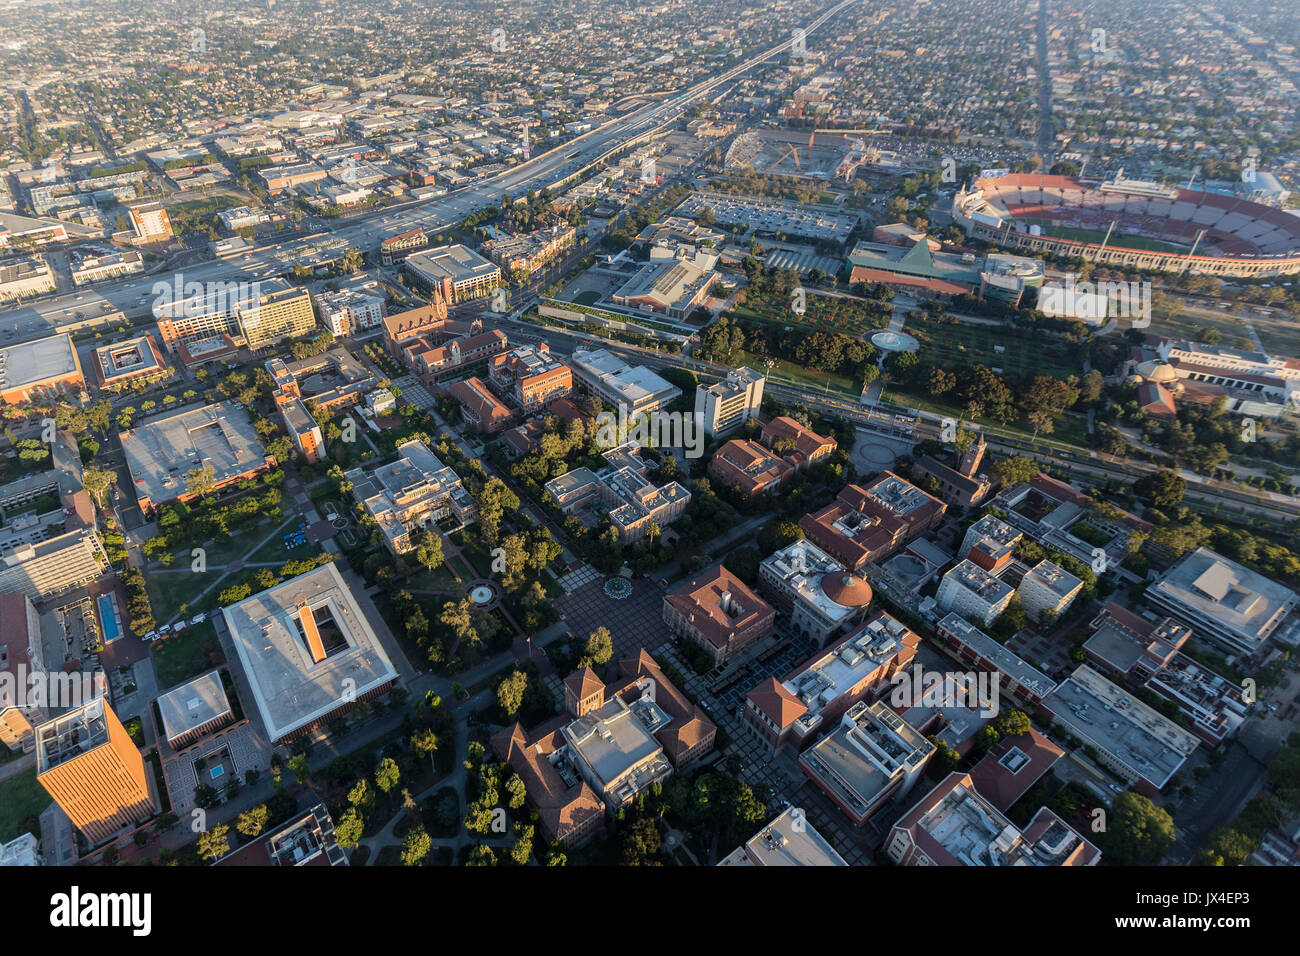 Los Angeles, California, USA - August 7, 2017:  Afternoon aerial view of the University of Southern California campus and Exposition Park. Stock Photo